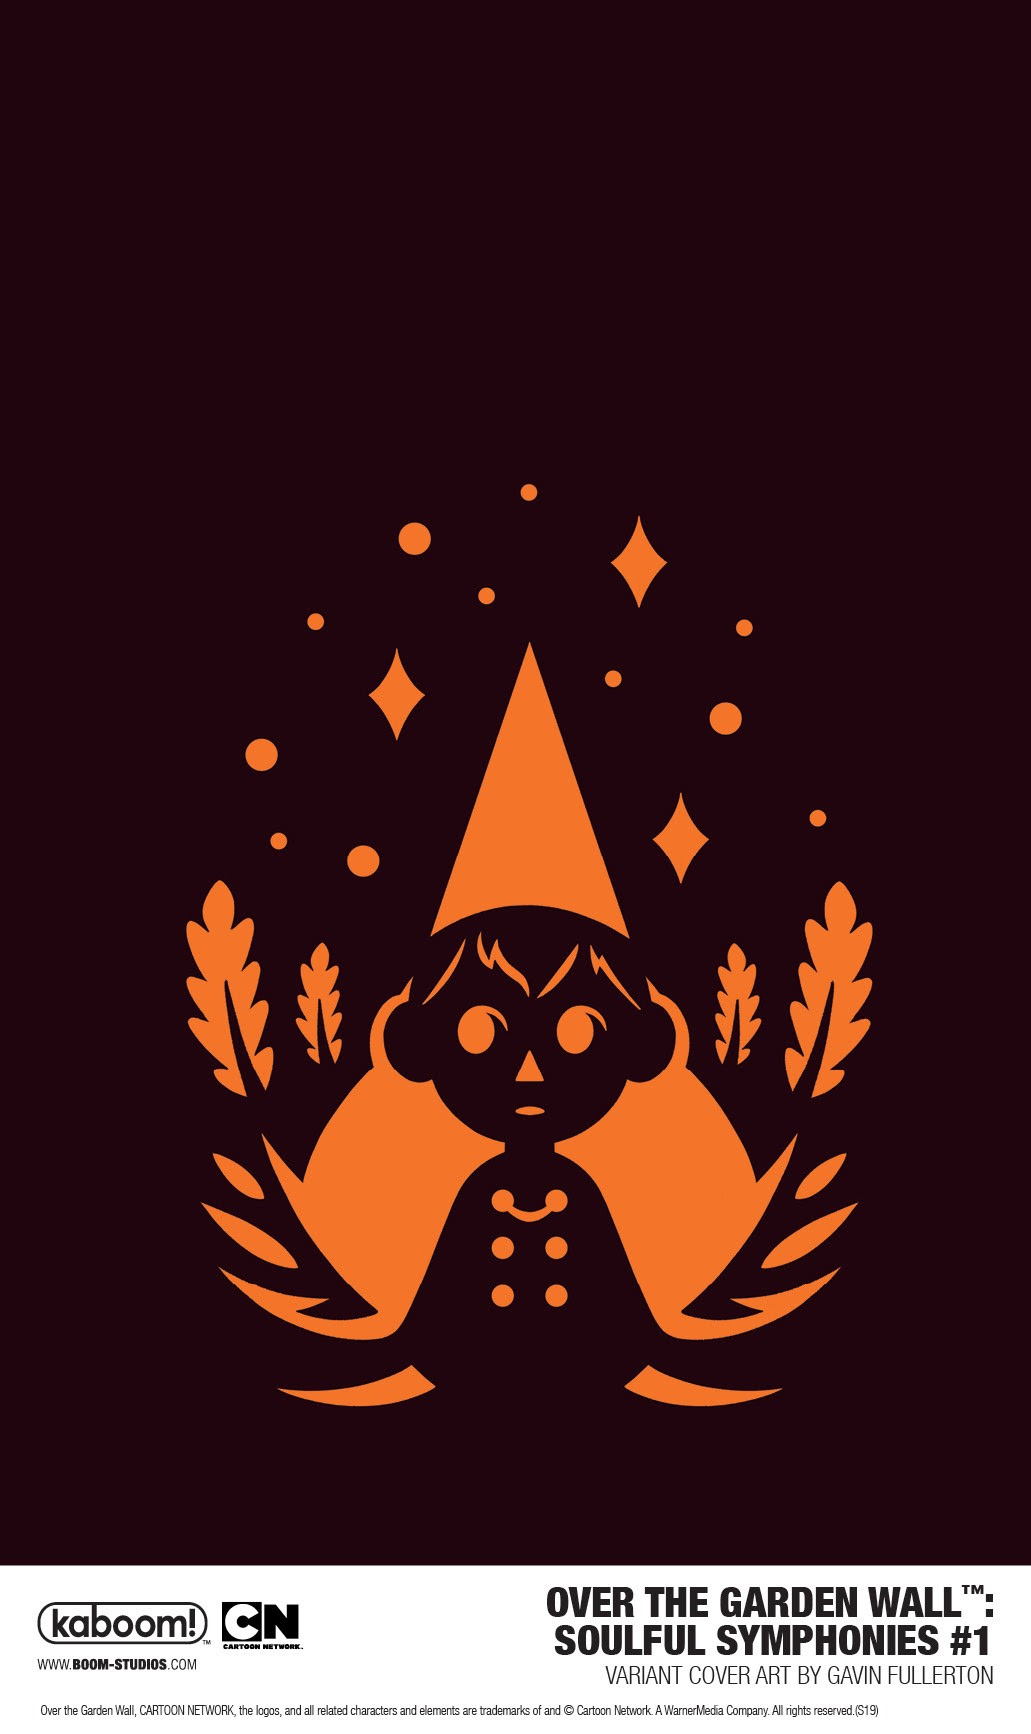 Over the Garden Wall: Soulful Symphonies #1 variant cover A